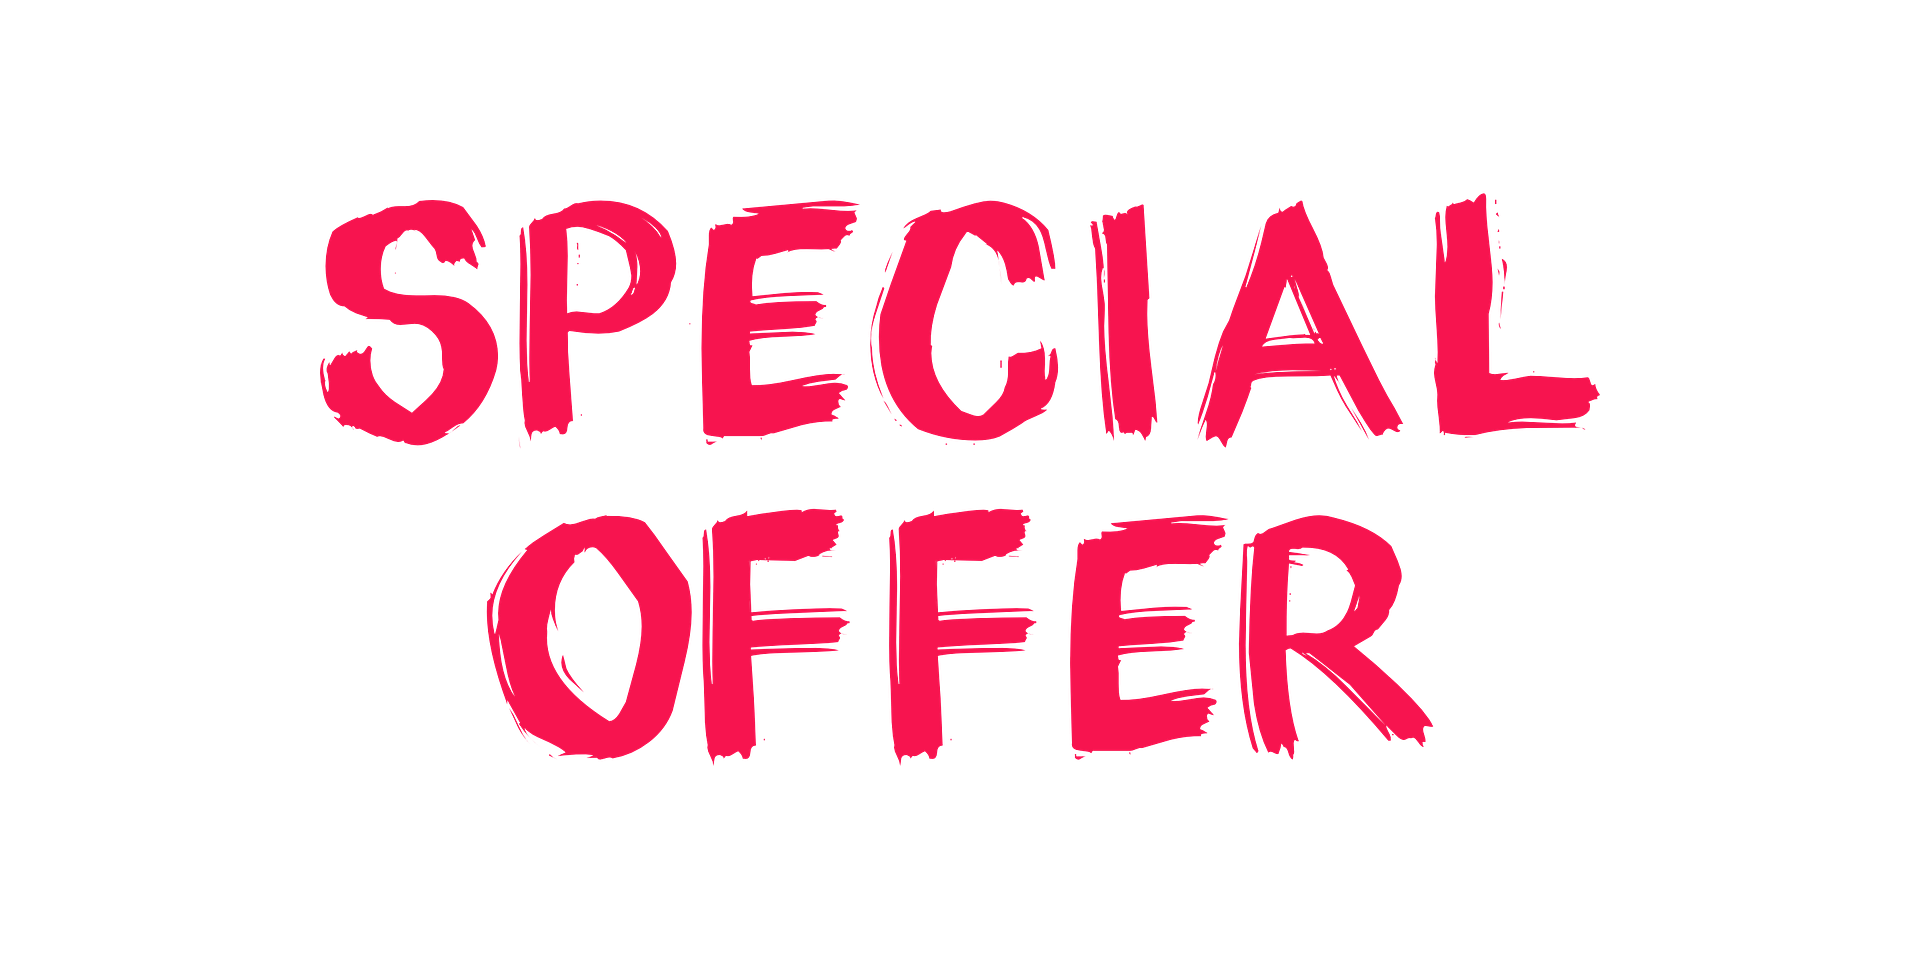 Red lettering in capital letters "Special Offer"